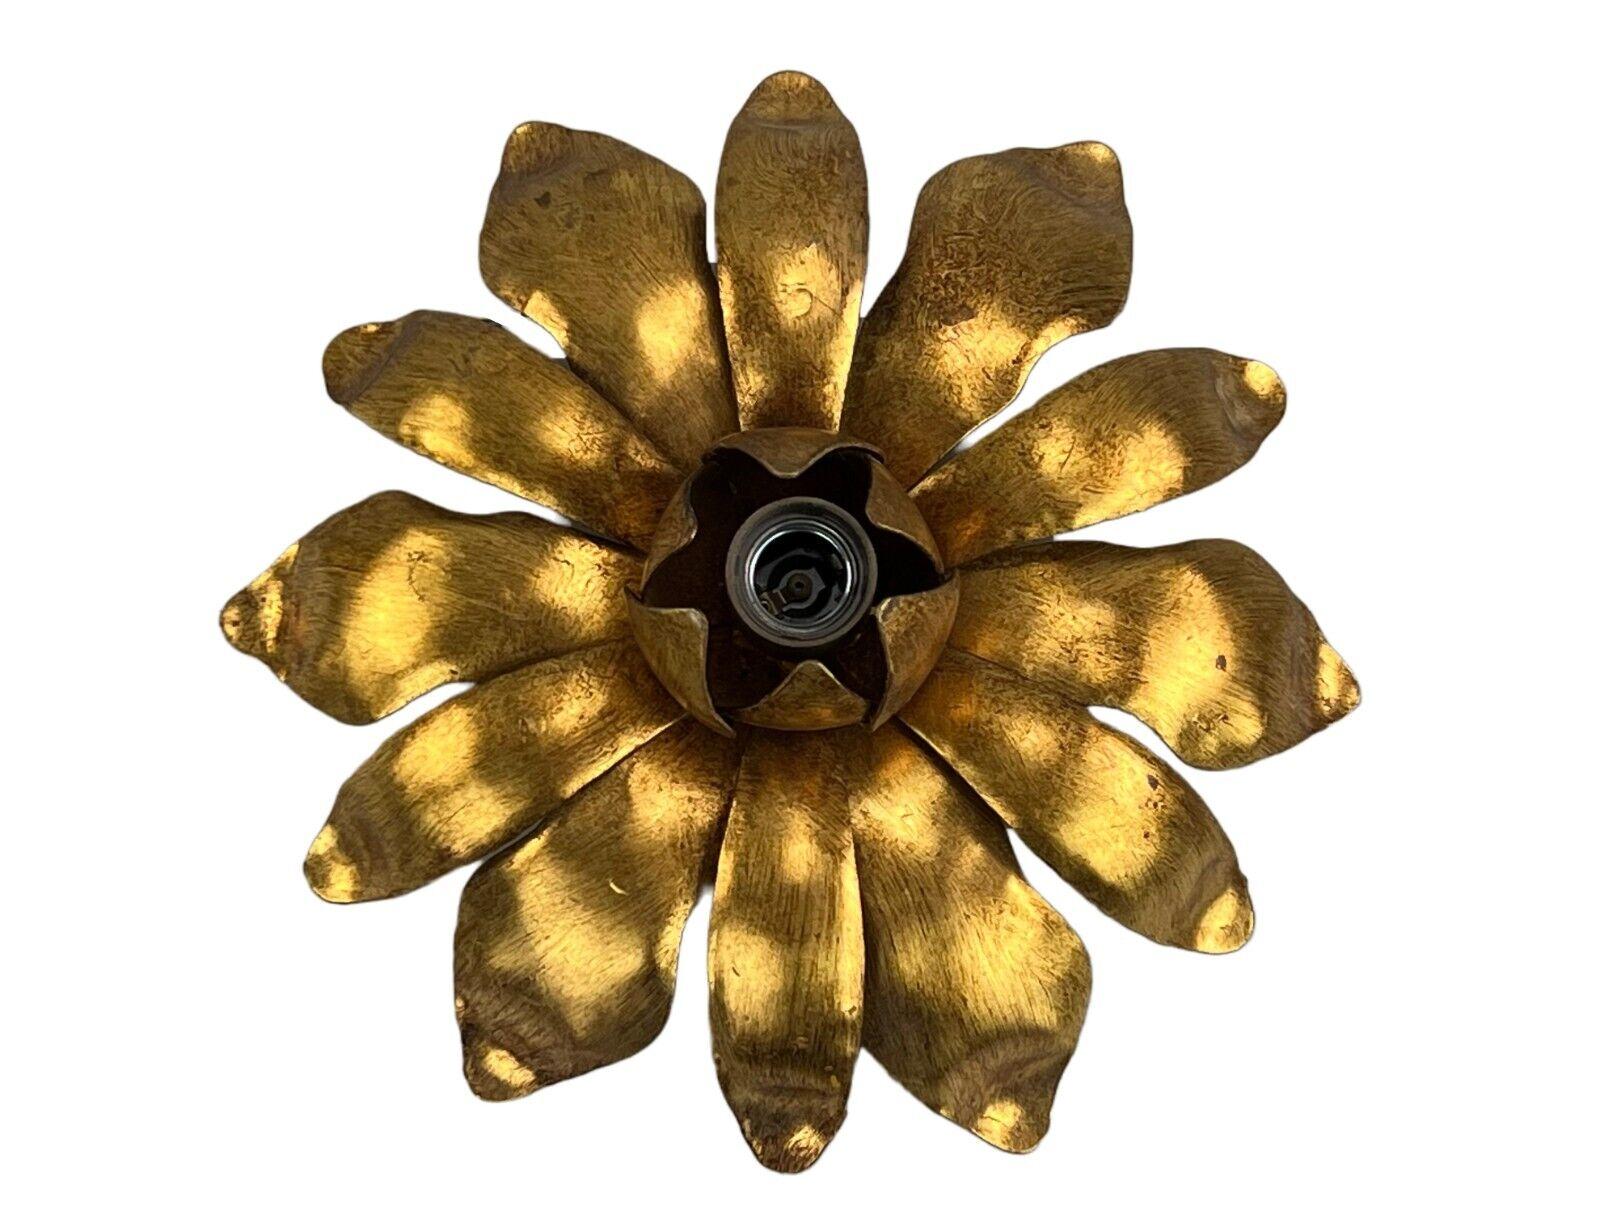 60s 70s lamp light wall lamp ceiling lamp Hans Möller brass design

Object: wall lamp

Manufacturer: Hans Moller

Condition: good

Age: around 1960-1970

Dimensions:

Diameter = 33cm
Height = 11cm

Other notes:

E27 socket

The